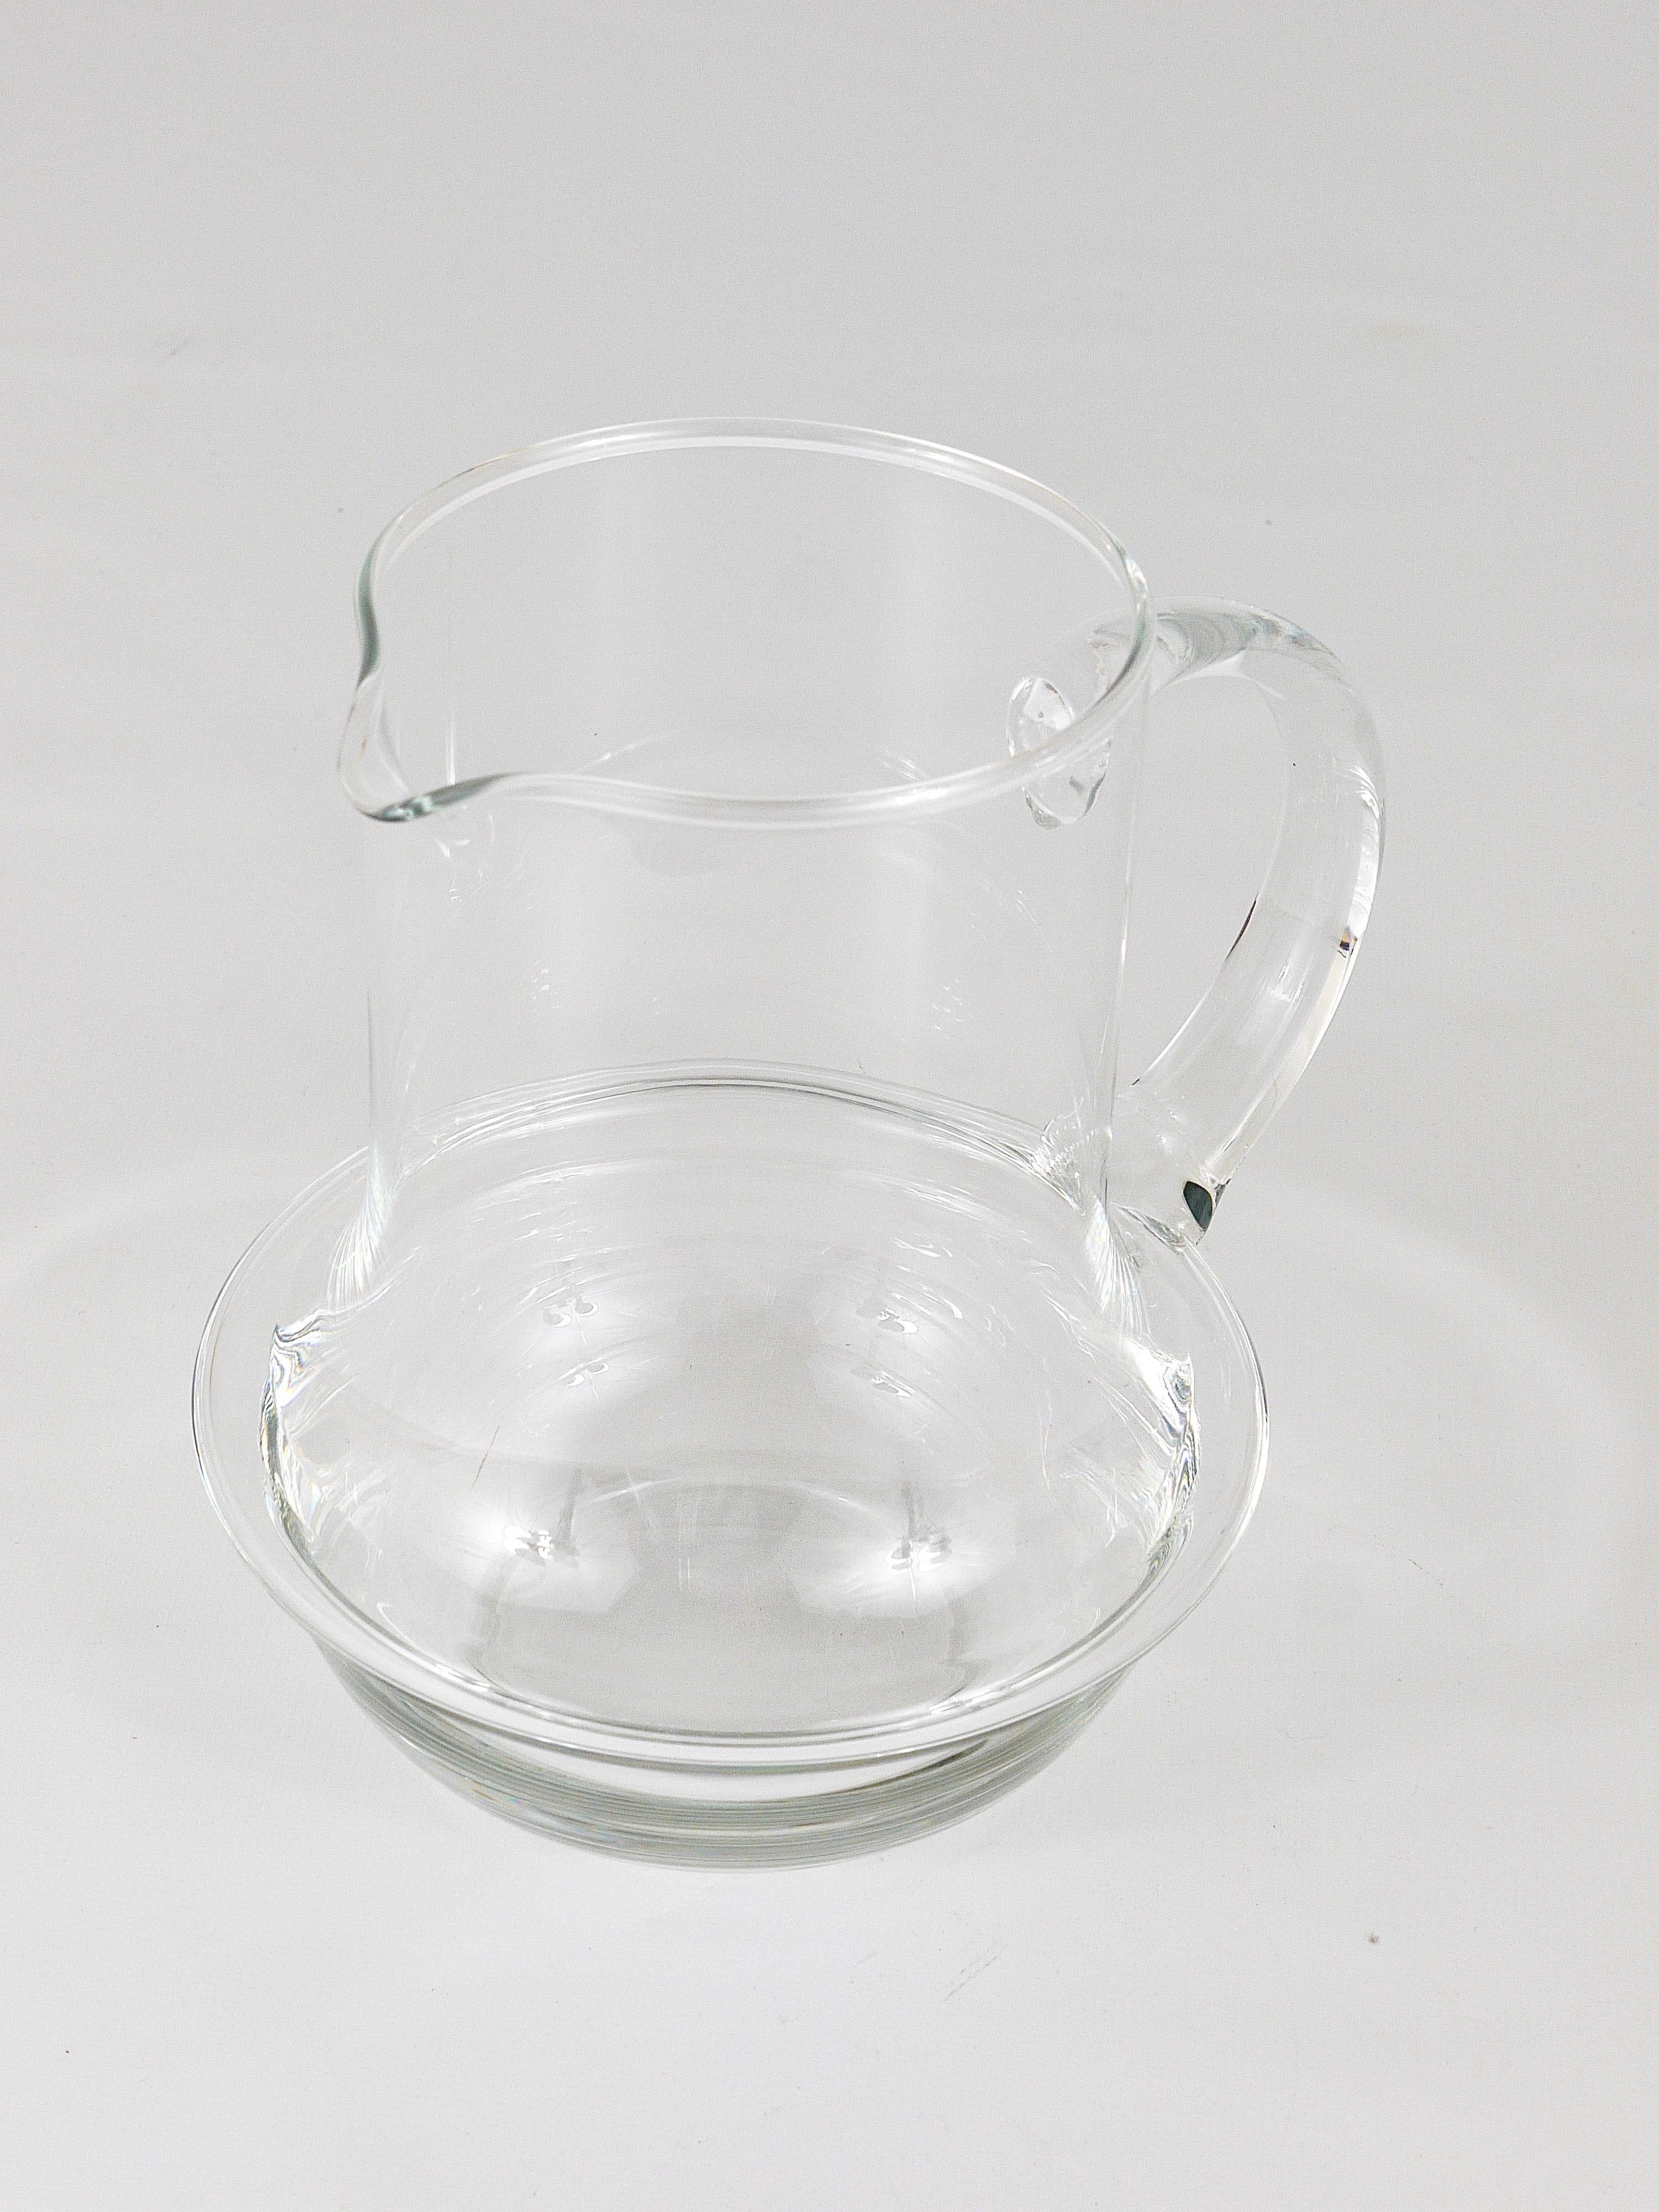 20th Century Carl Auböck Midcentury Glass Pitcher Jug by Ostovics Culinar, Austria, 1970s For Sale